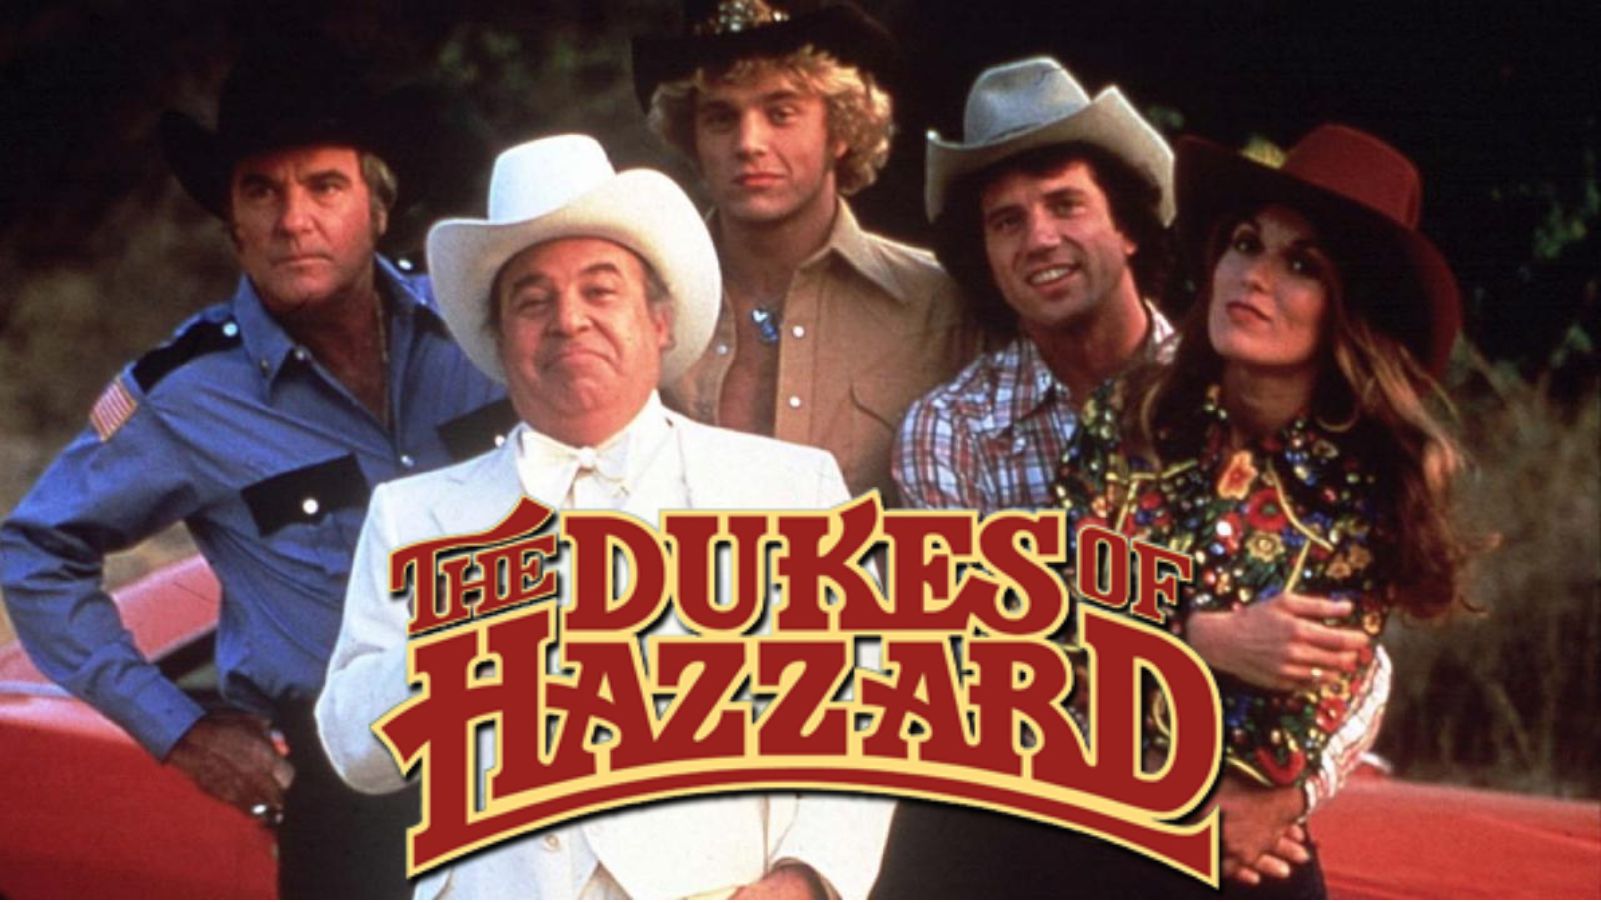 Here S What The Cast Of The Dukes Of Hazzard Look Like Now | Hot Sex ...